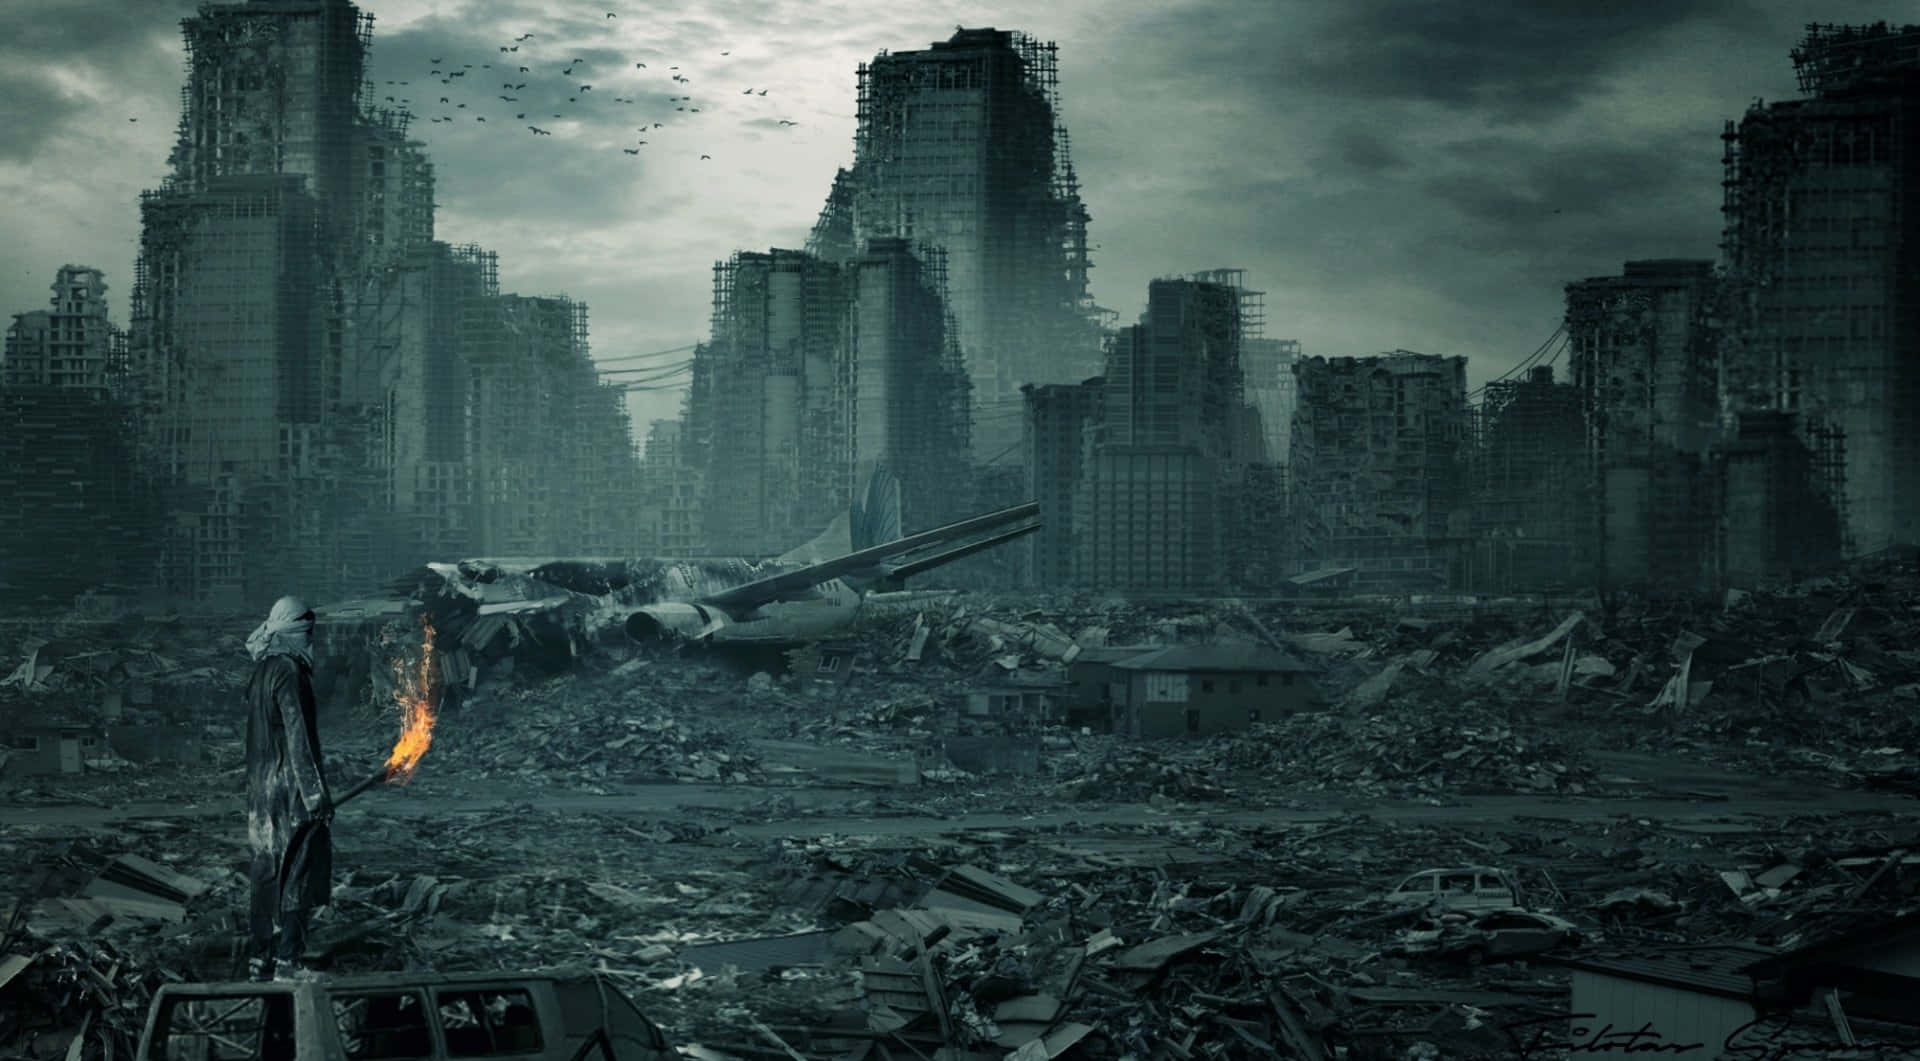 A haunting image portraying the dramatic aftermath of an apocalyptic event. Wallpaper